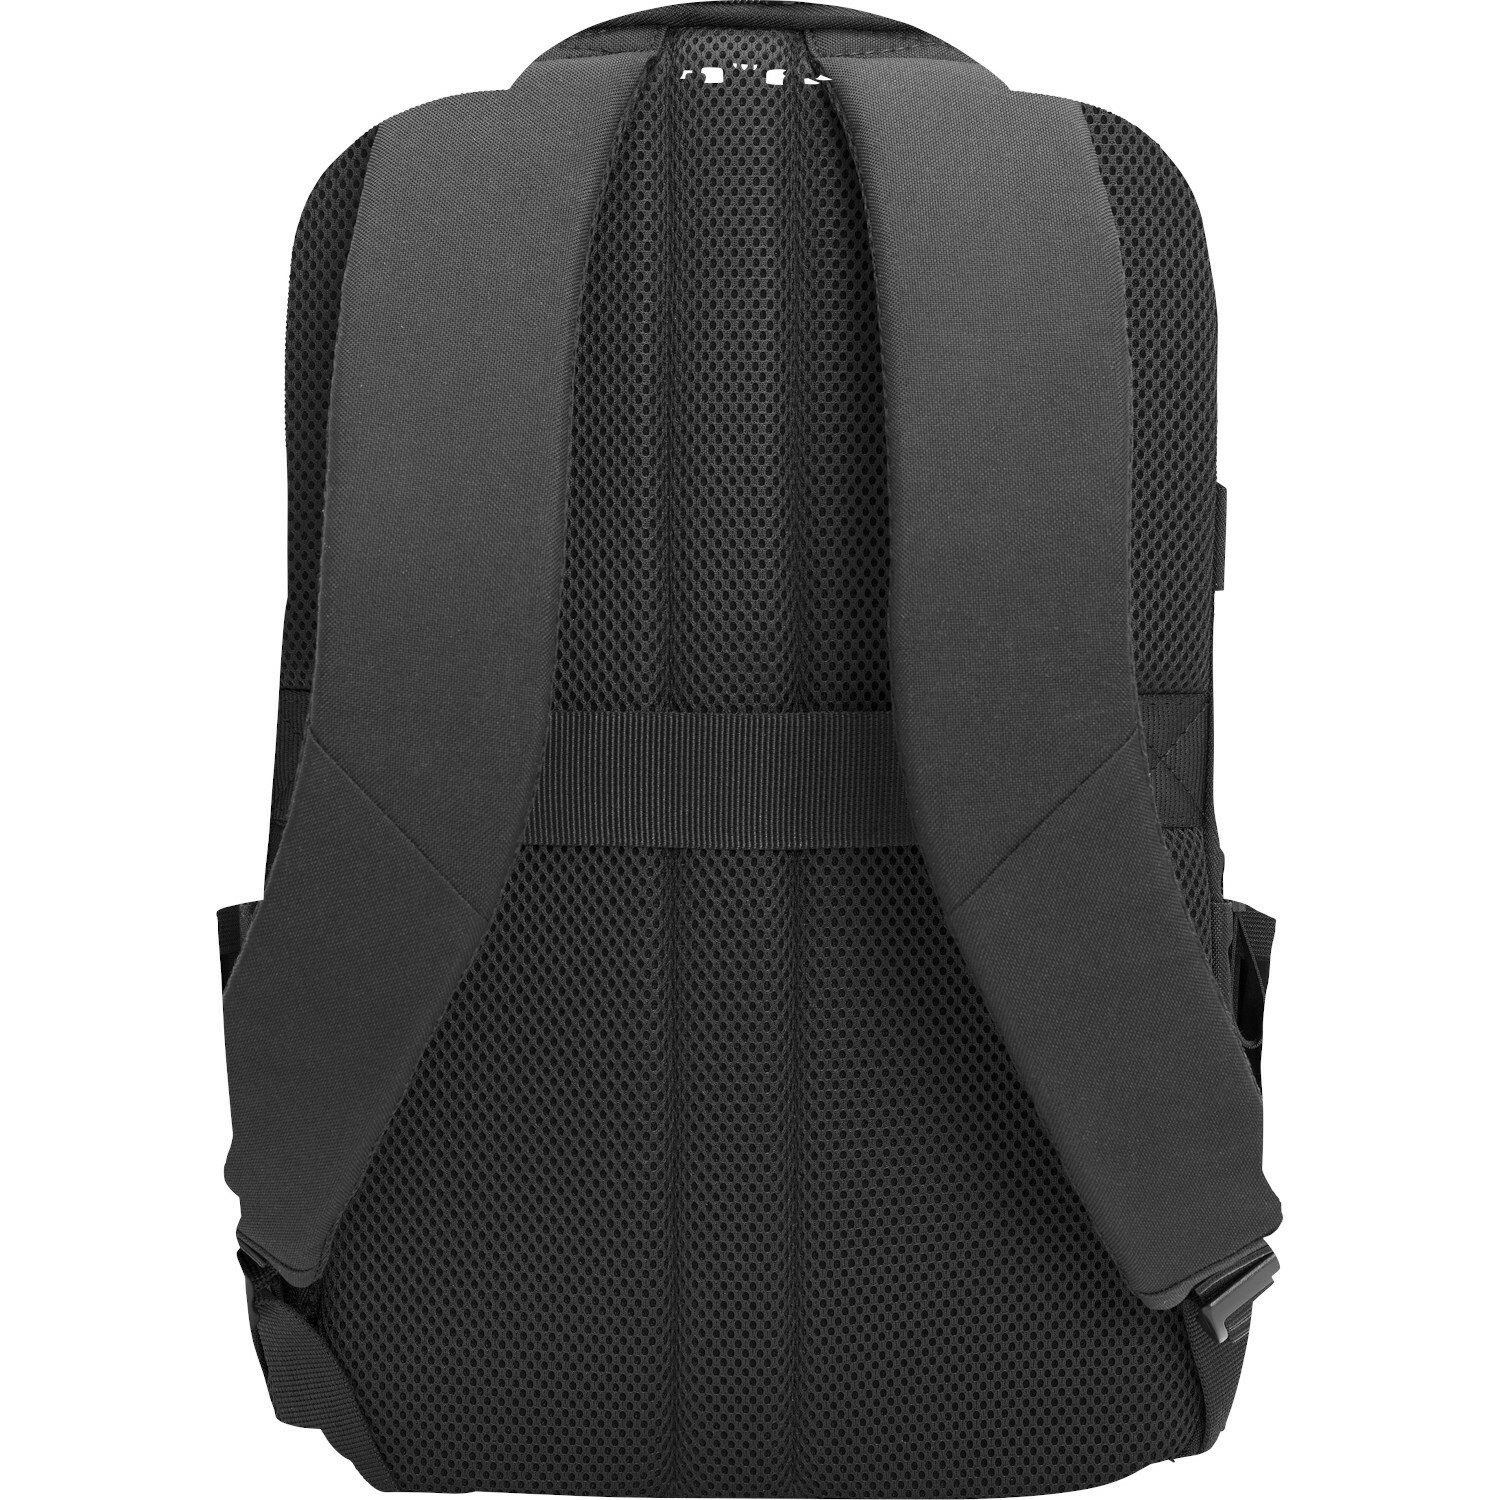 HP Renew Executive Carrying Case (Backpack) for 13" to 16.1" HP Notebook - Black